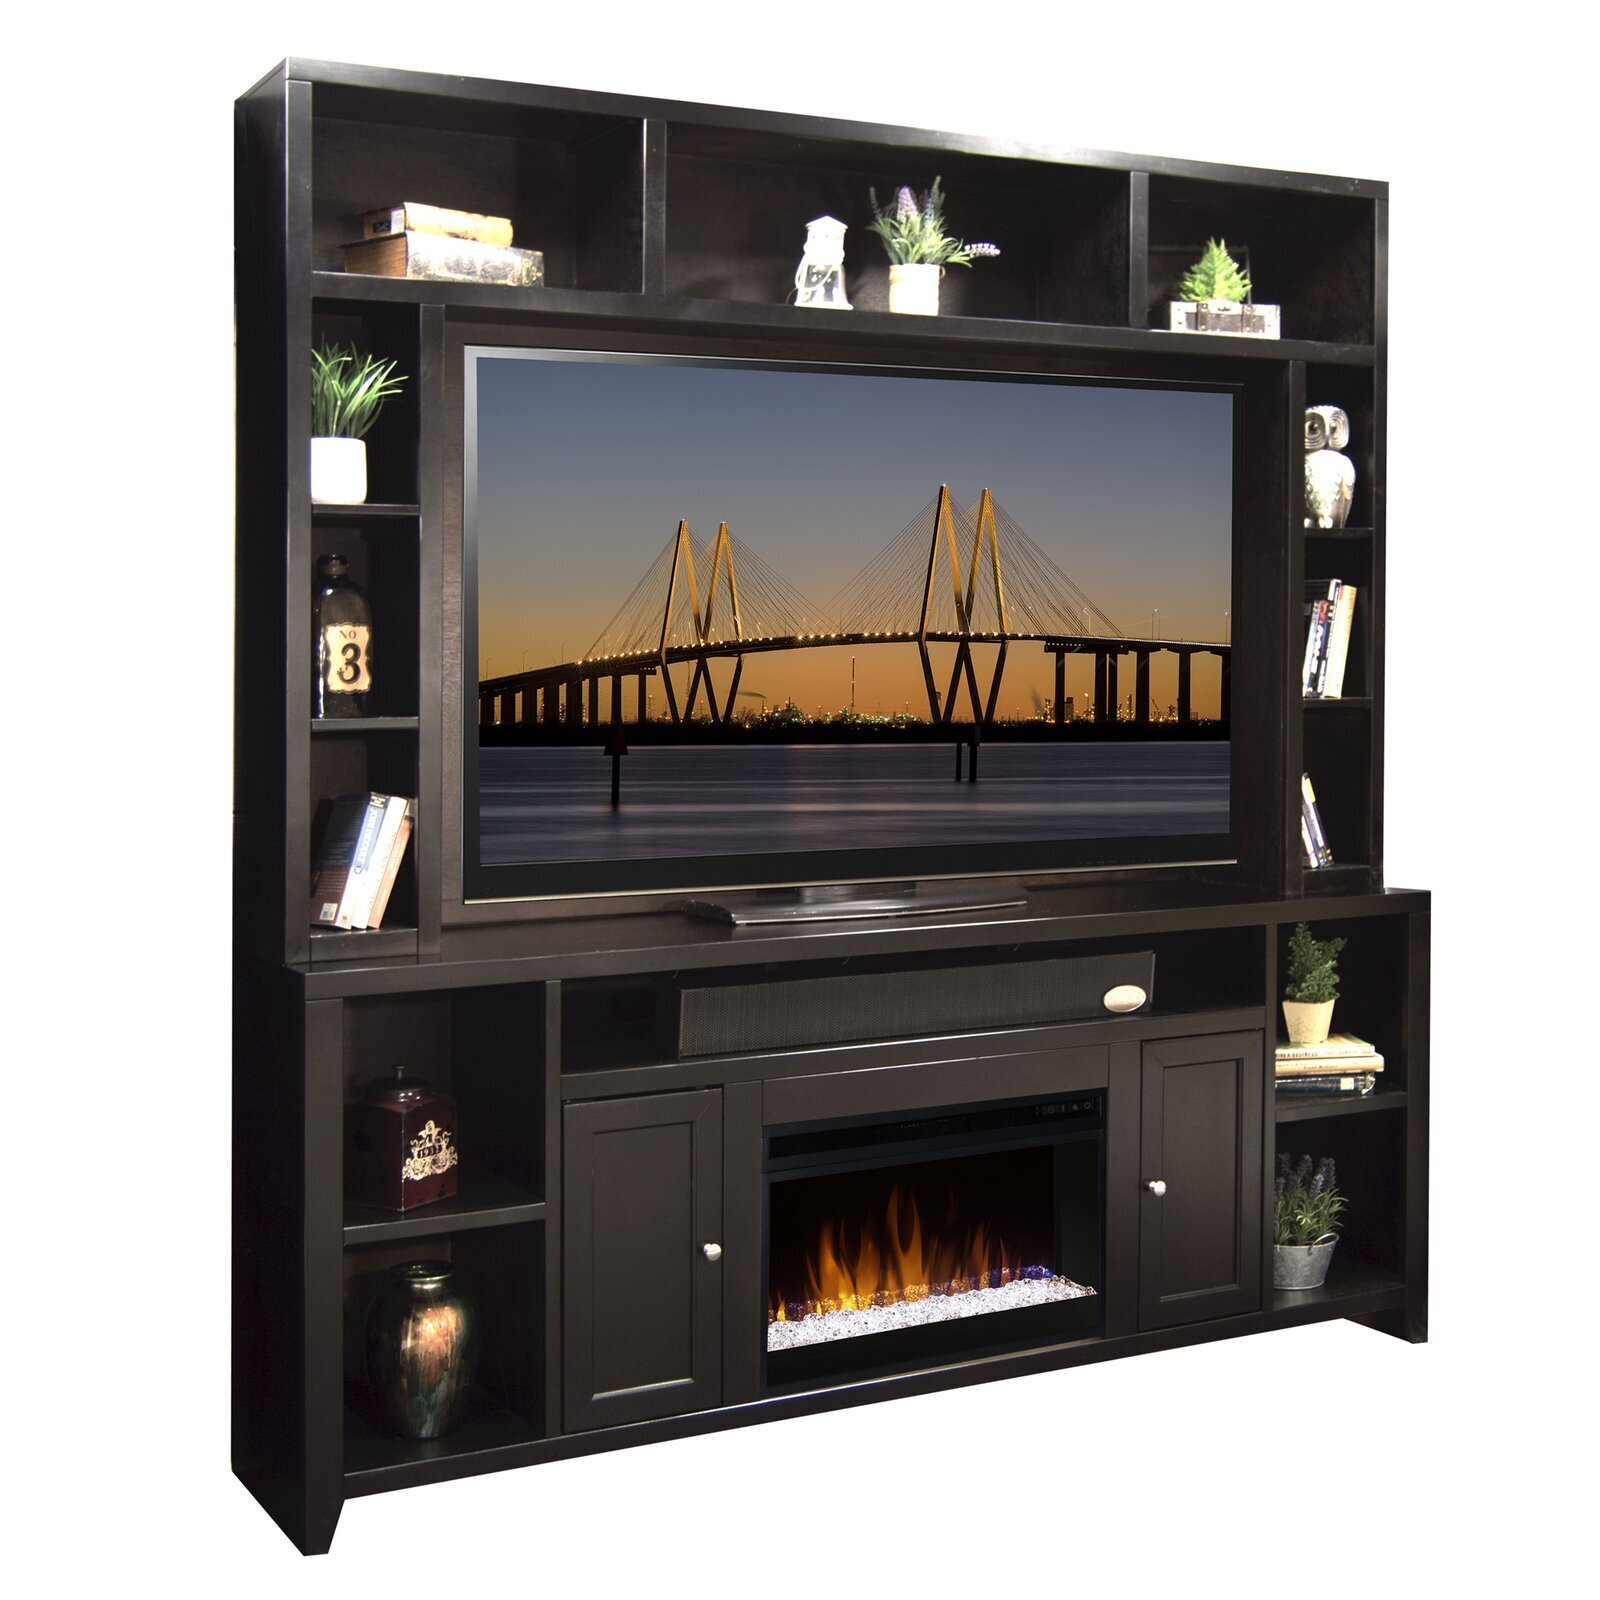 Maple entertainment center with electric fireplace